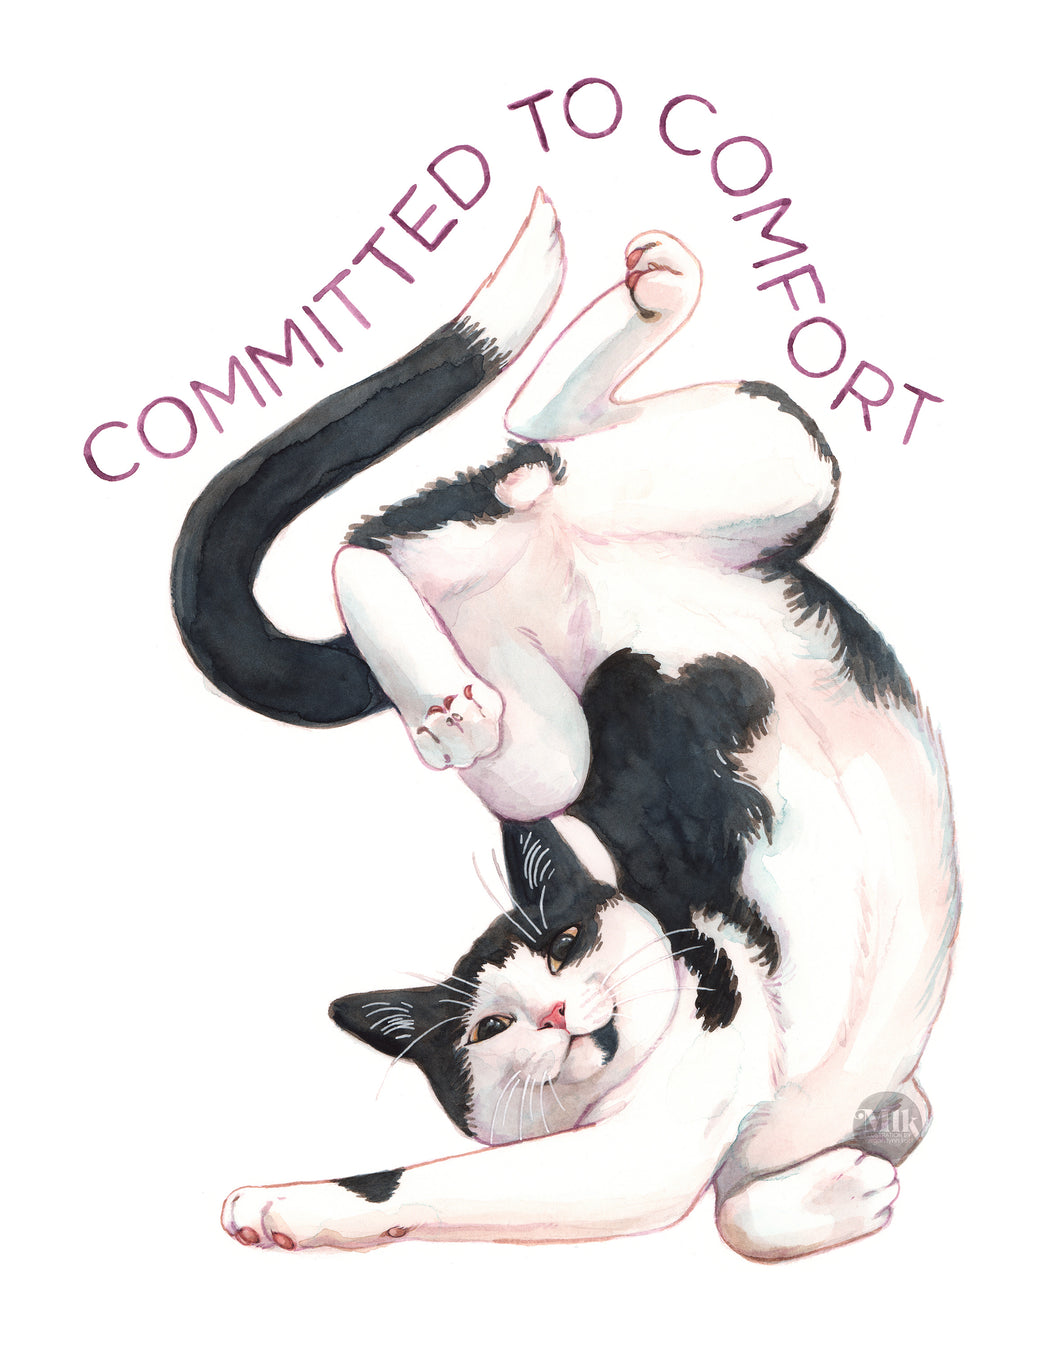 Committed To Comfort - 11x14